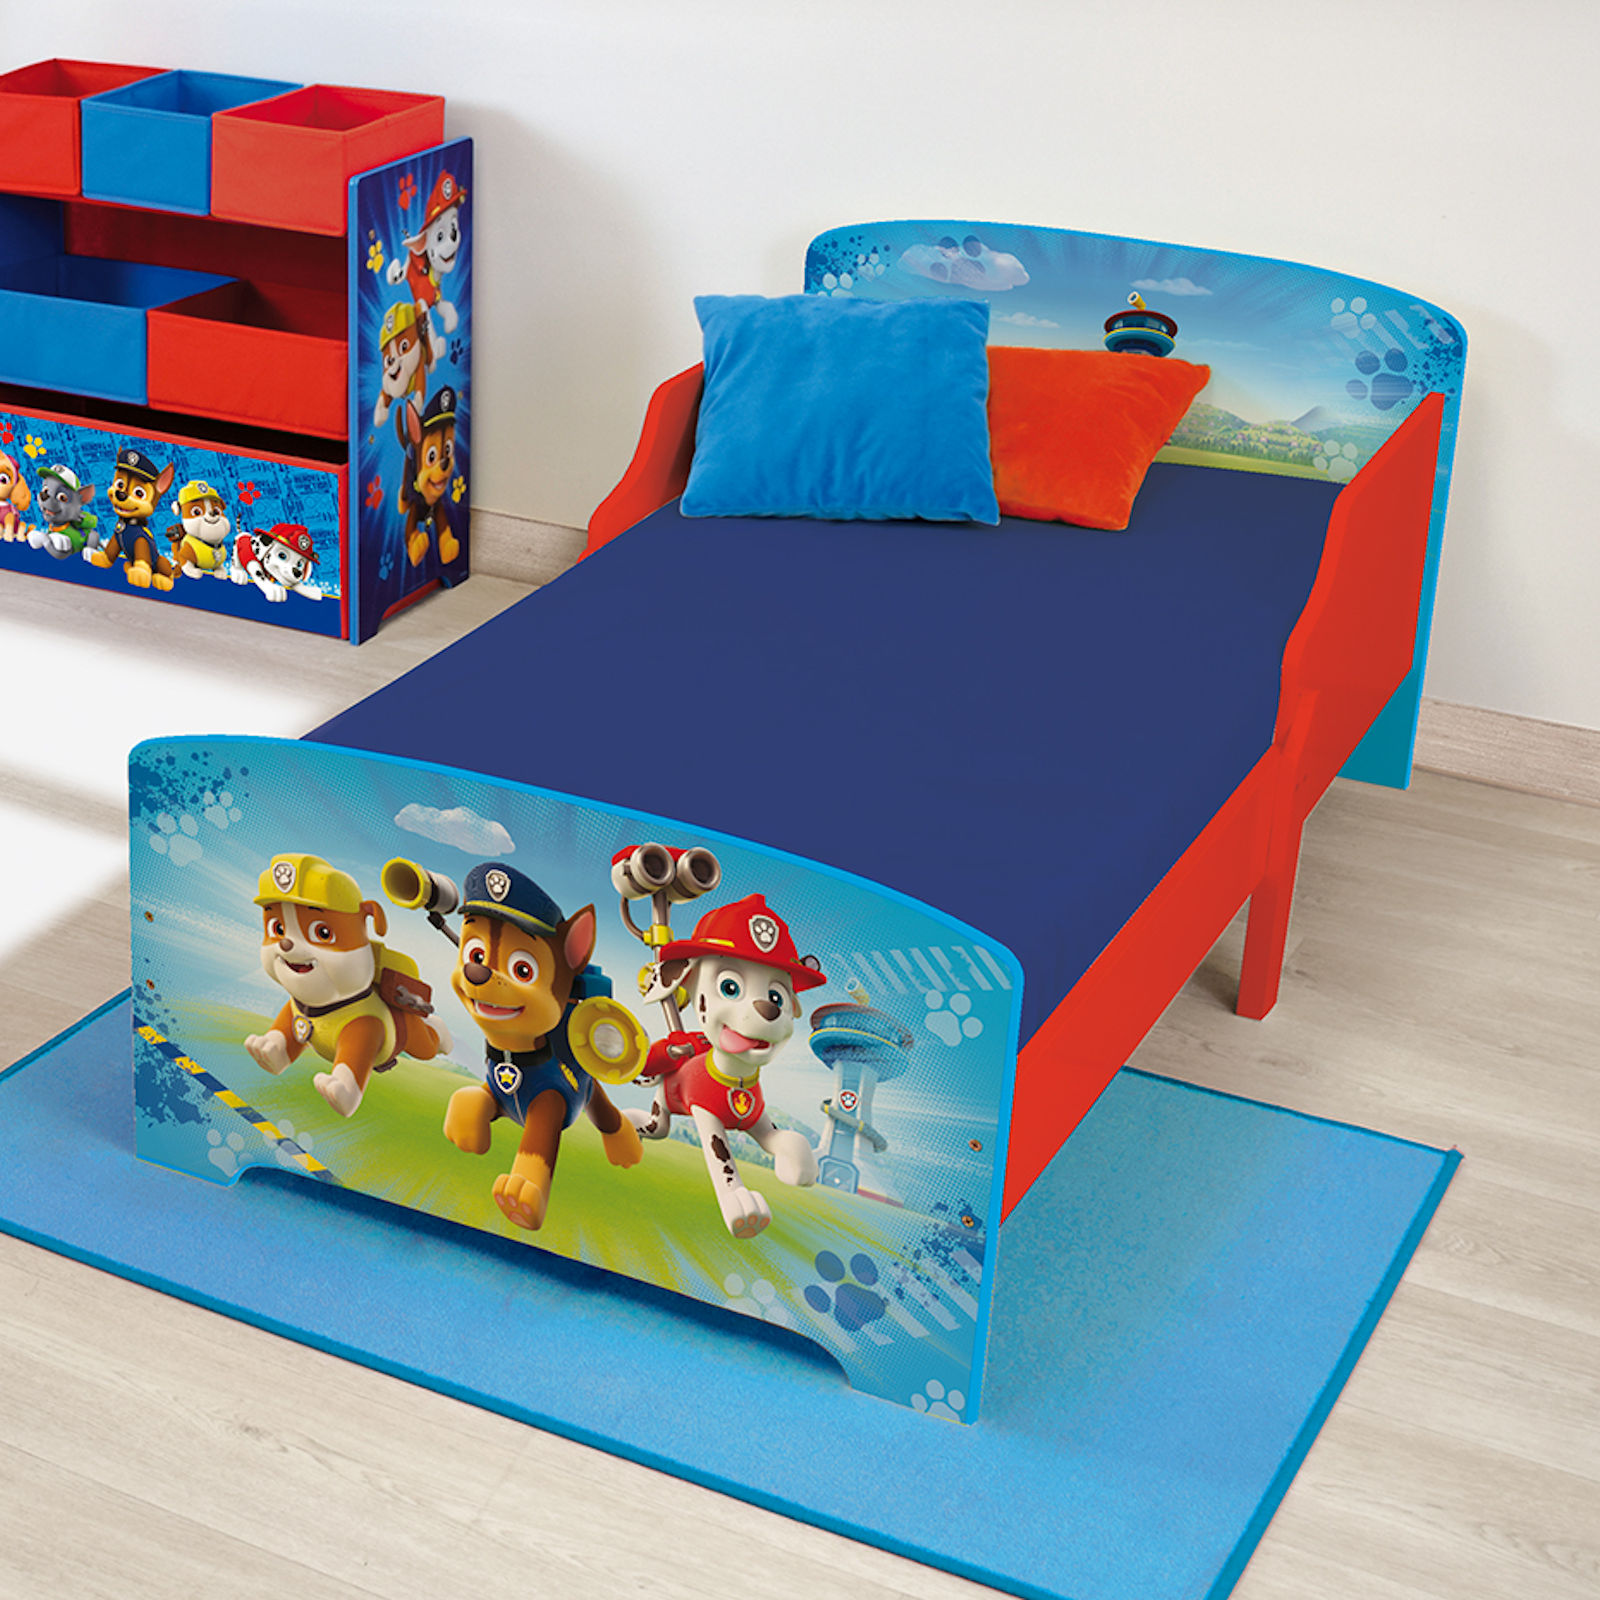 Paw Patrol Wooden Junior Toddler Bed with Eco Fibre Hypo Allergenic Toddler Bed Mattress – Blue/White